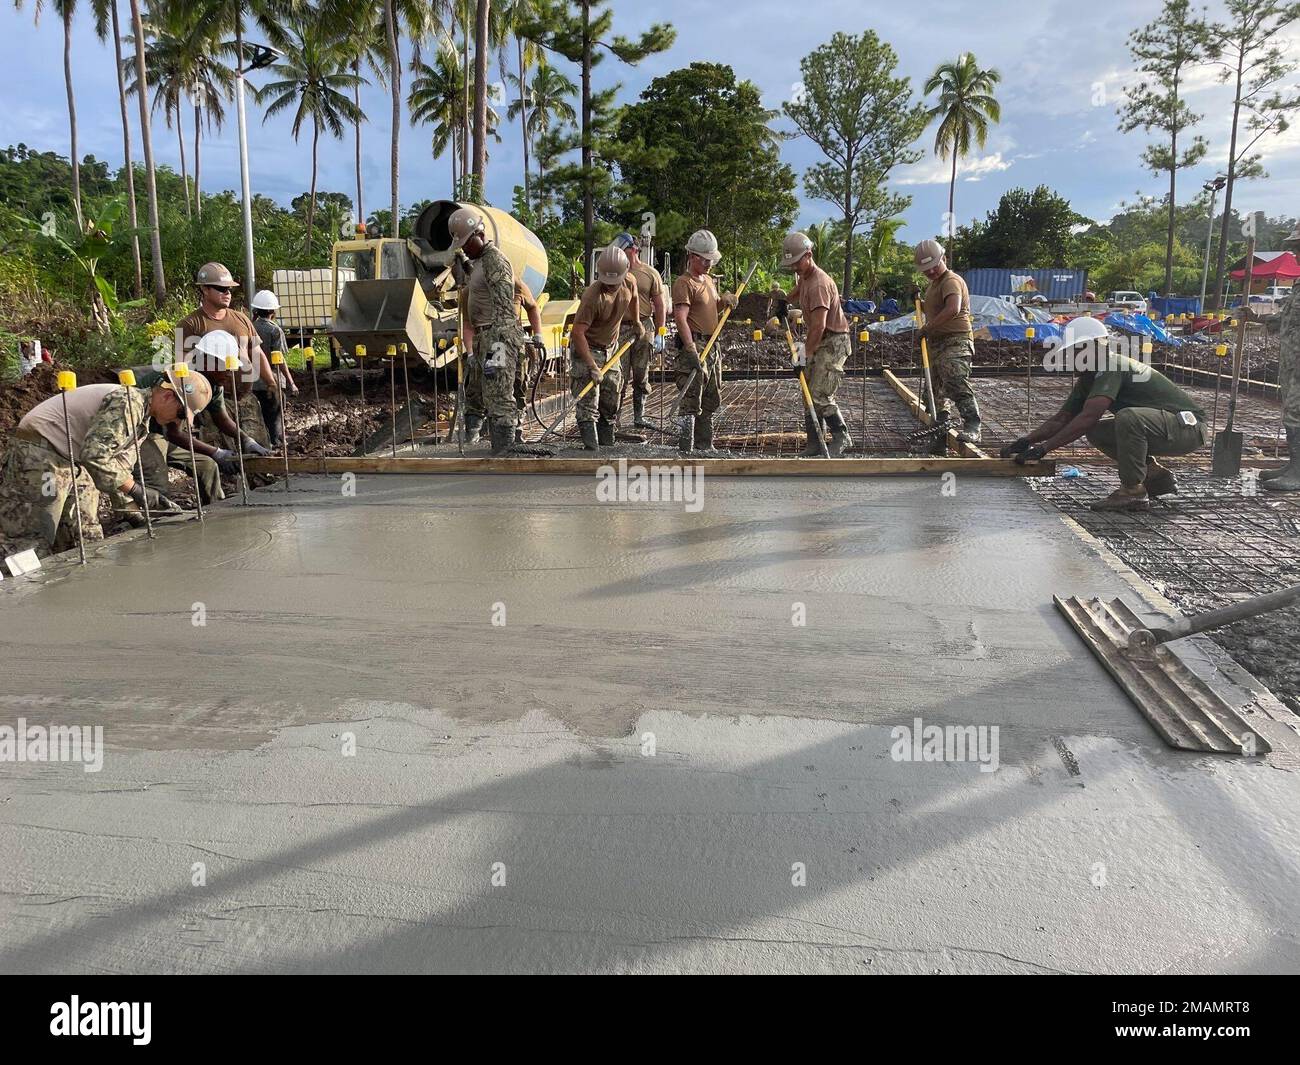 SAVUSAVU, Republic of Fiji (May 30, 2022) — U.S. Navy Seabees assigned to Naval Mobile Construction Battalion 3 (NMCB-3), alongside Army Engineers from the Republic of Fiji Military Forces, construct a concrete pad in support of a Pacific Partnership 2022 engineering primary school engineering project. Now in its 17th year, Pacific Partnership is the largest annual multinational humanitarian assistance and disaster relief preparedness mission conducted in the Indo-Pacific. Stock Photo